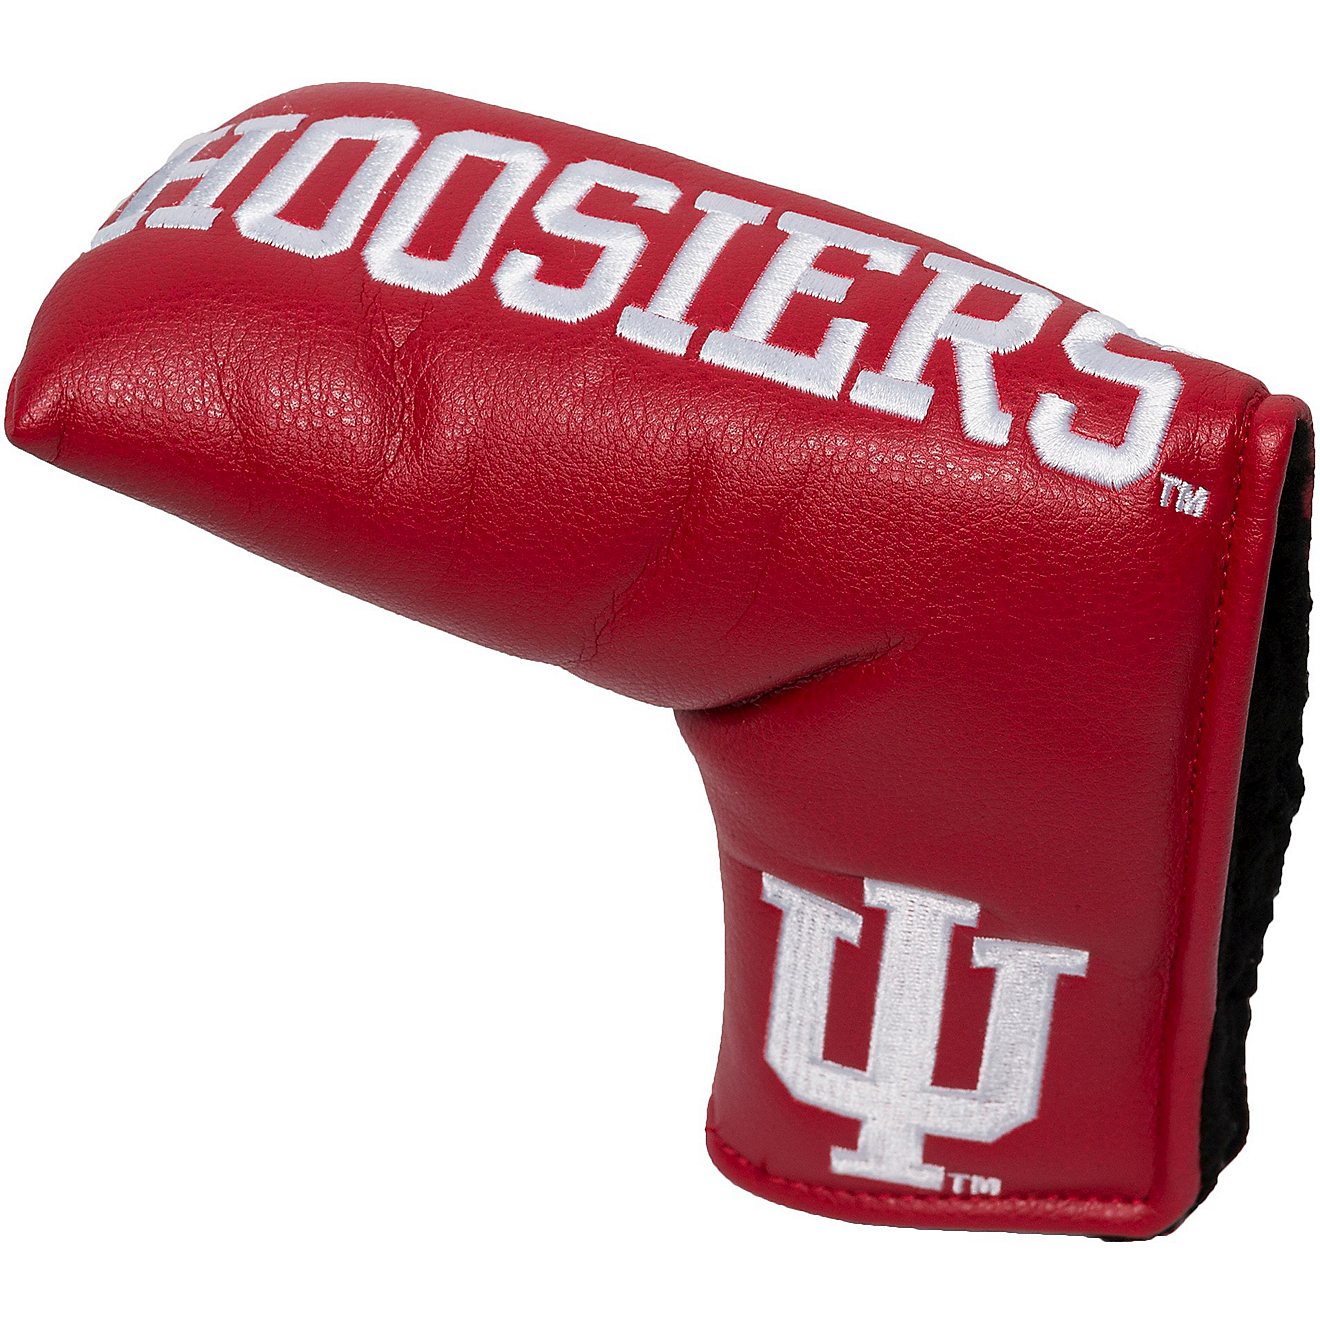 Team Golf Indiana University Vintage Blade Putter Cover                                                                          - view number 1